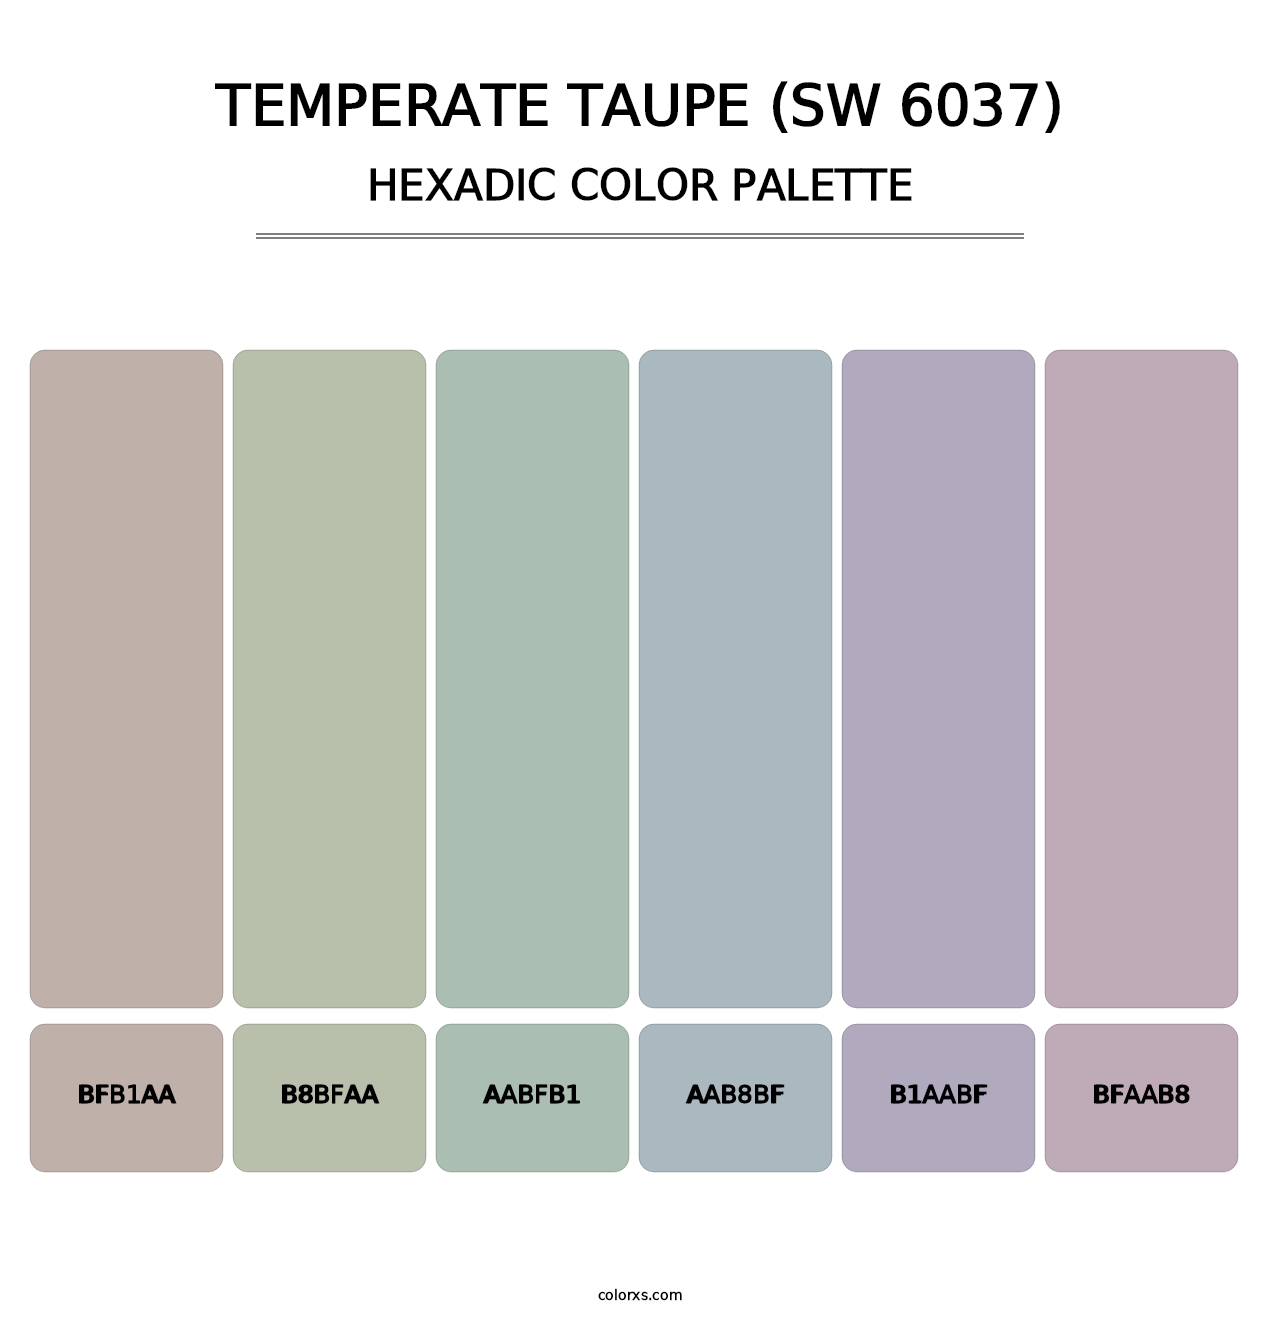 Temperate Taupe (SW 6037) - Hexadic Color Palette